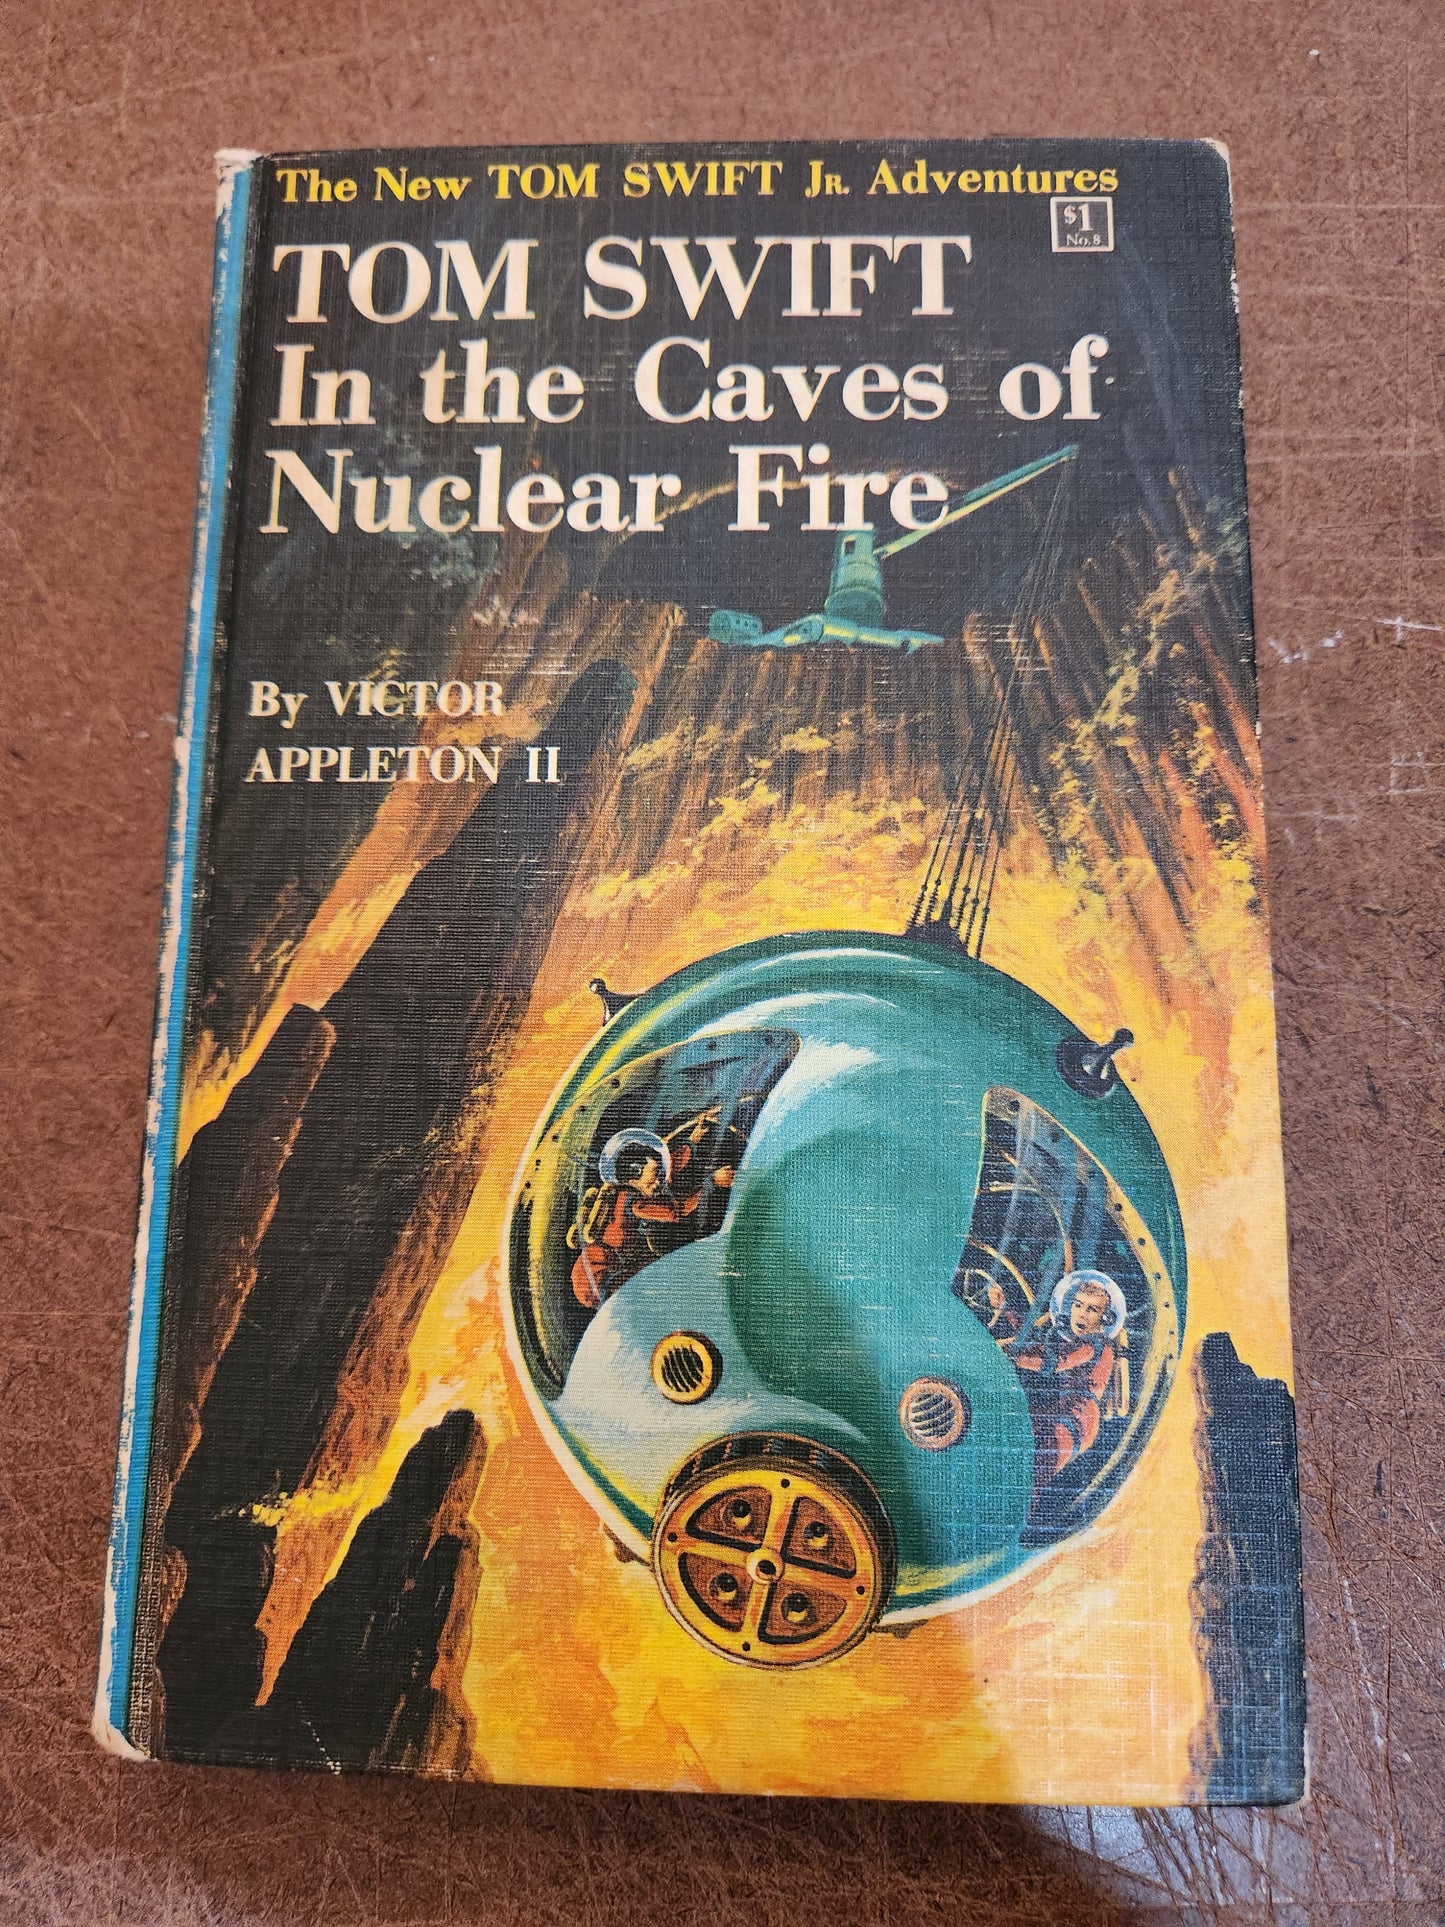 "Tom Swift In the Caves of Nuclear Fire" by Victor Appleton II (Blue Spine)(Yellow spine)